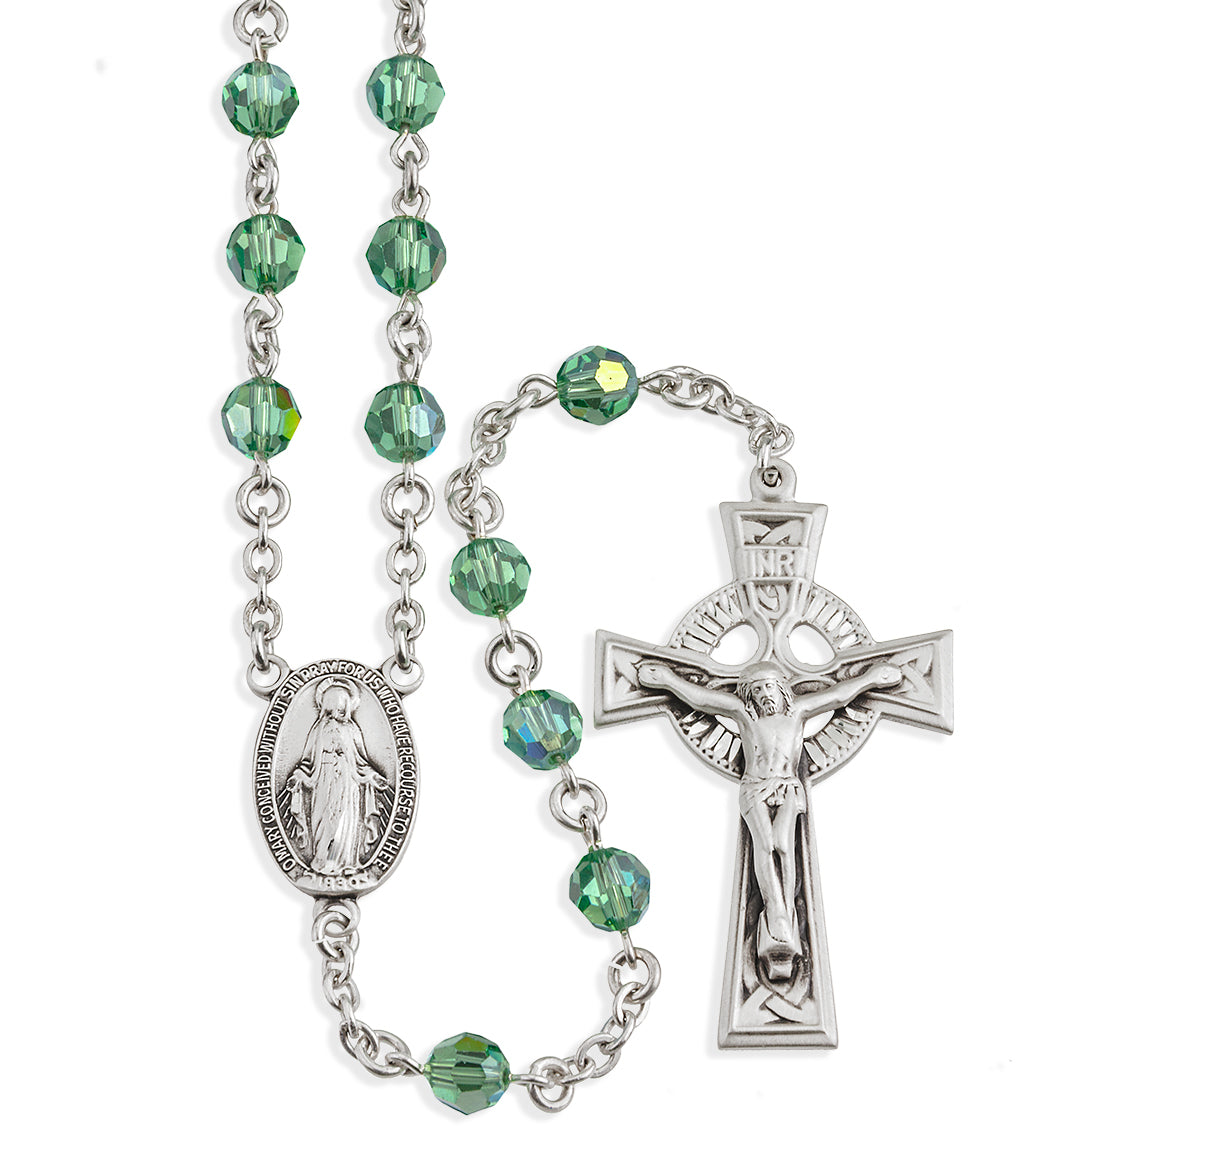 Sterling Silver Rosary Hand Made with Swarovski Crystal 6mm Erinite Faceted Round Beads by HMH